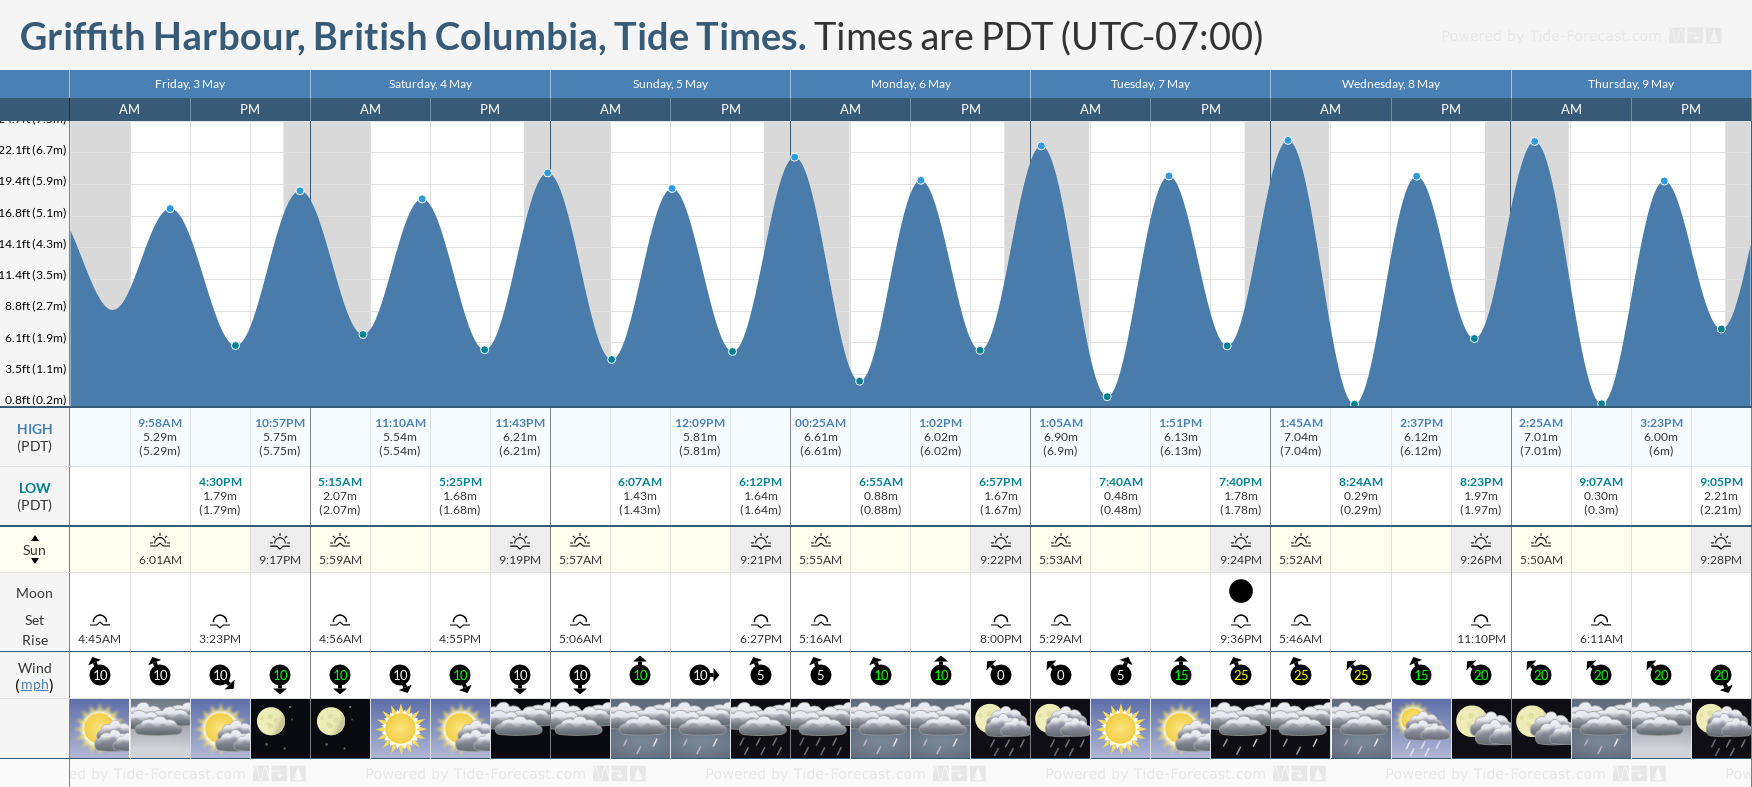 Griffith Harbour, British Columbia Tide Chart including high and low tide tide times for the next 7 days